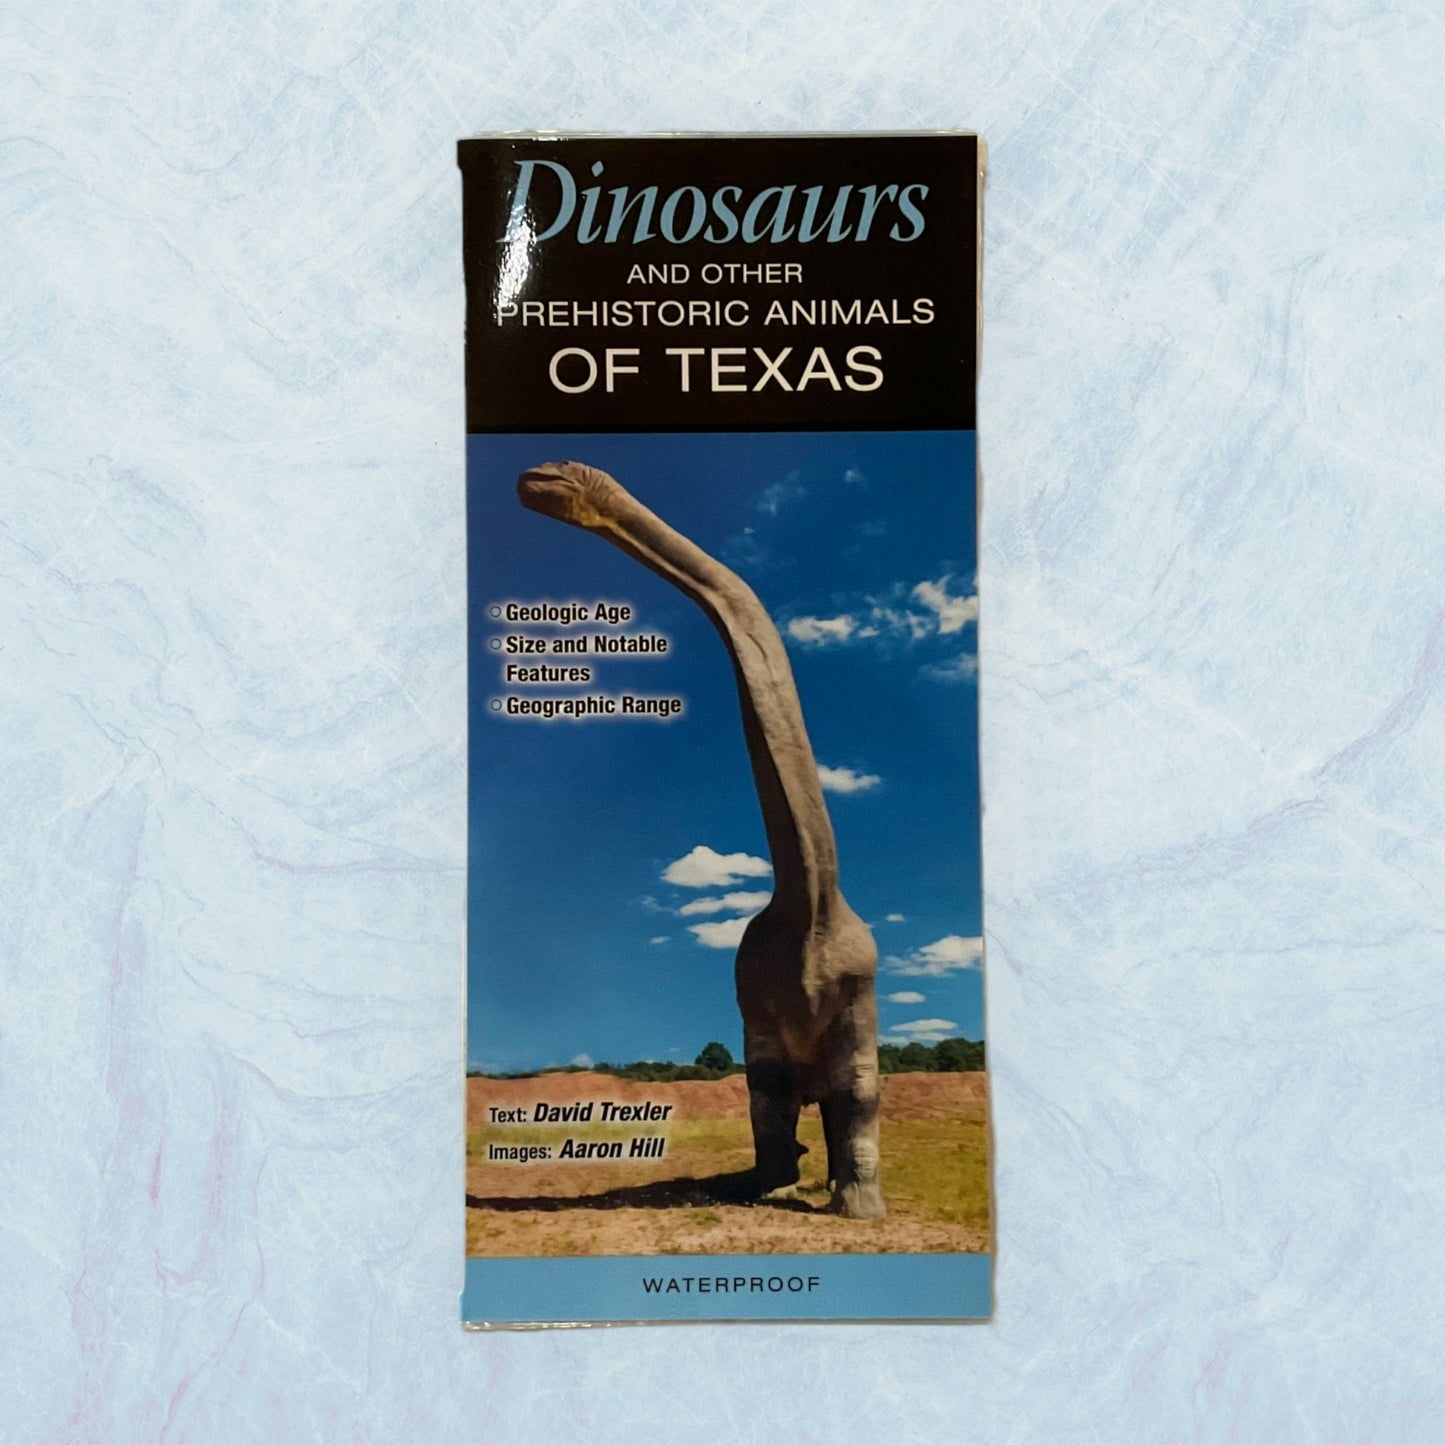 Guide - Dinosaurs of Texas